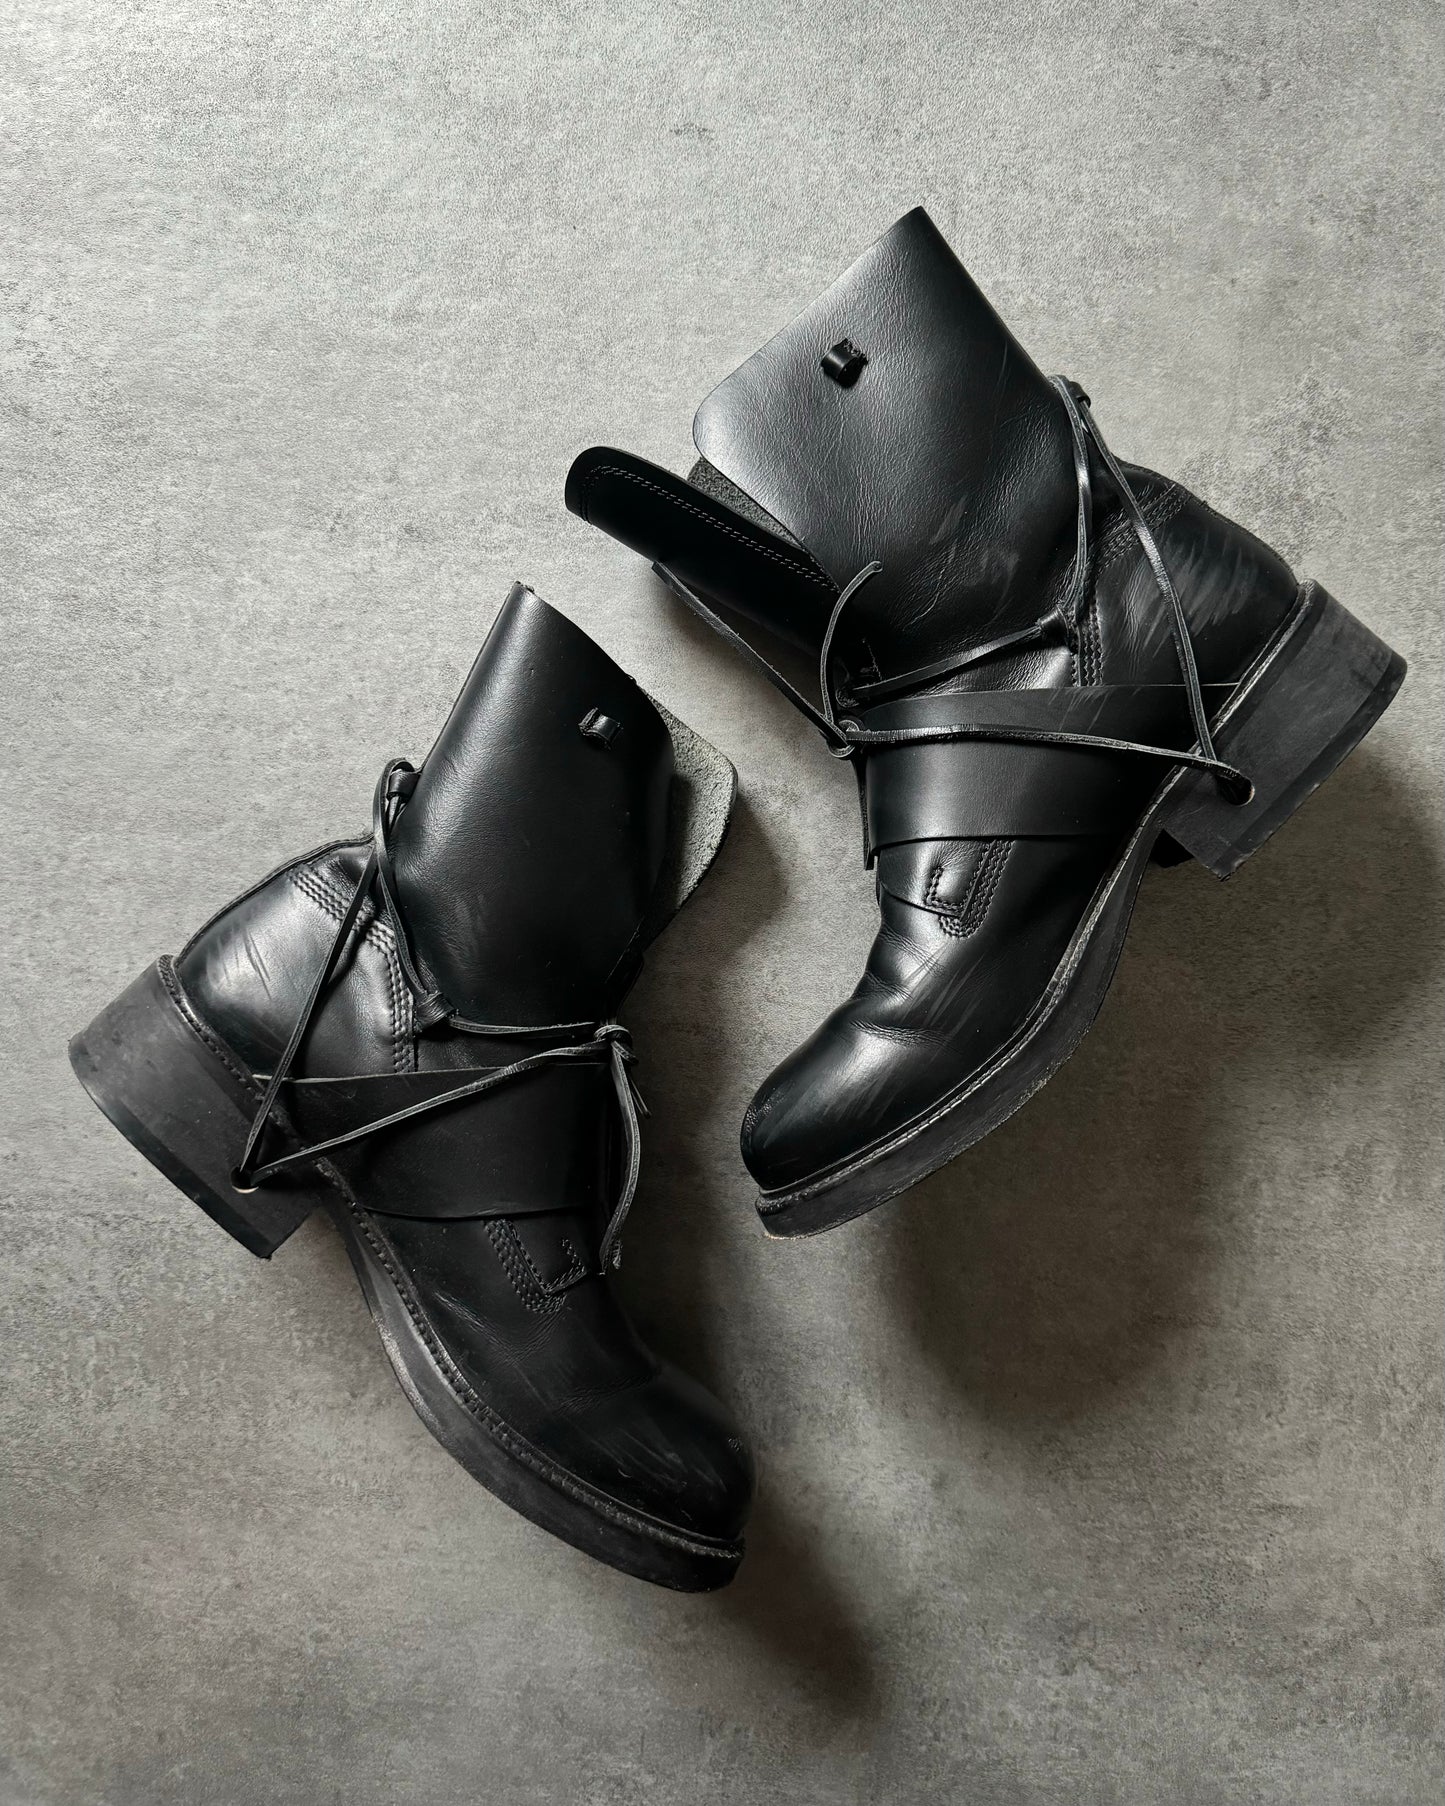 AW1998 Dirk Bikkembergs High Mountaineering Black Boots (43) - 8